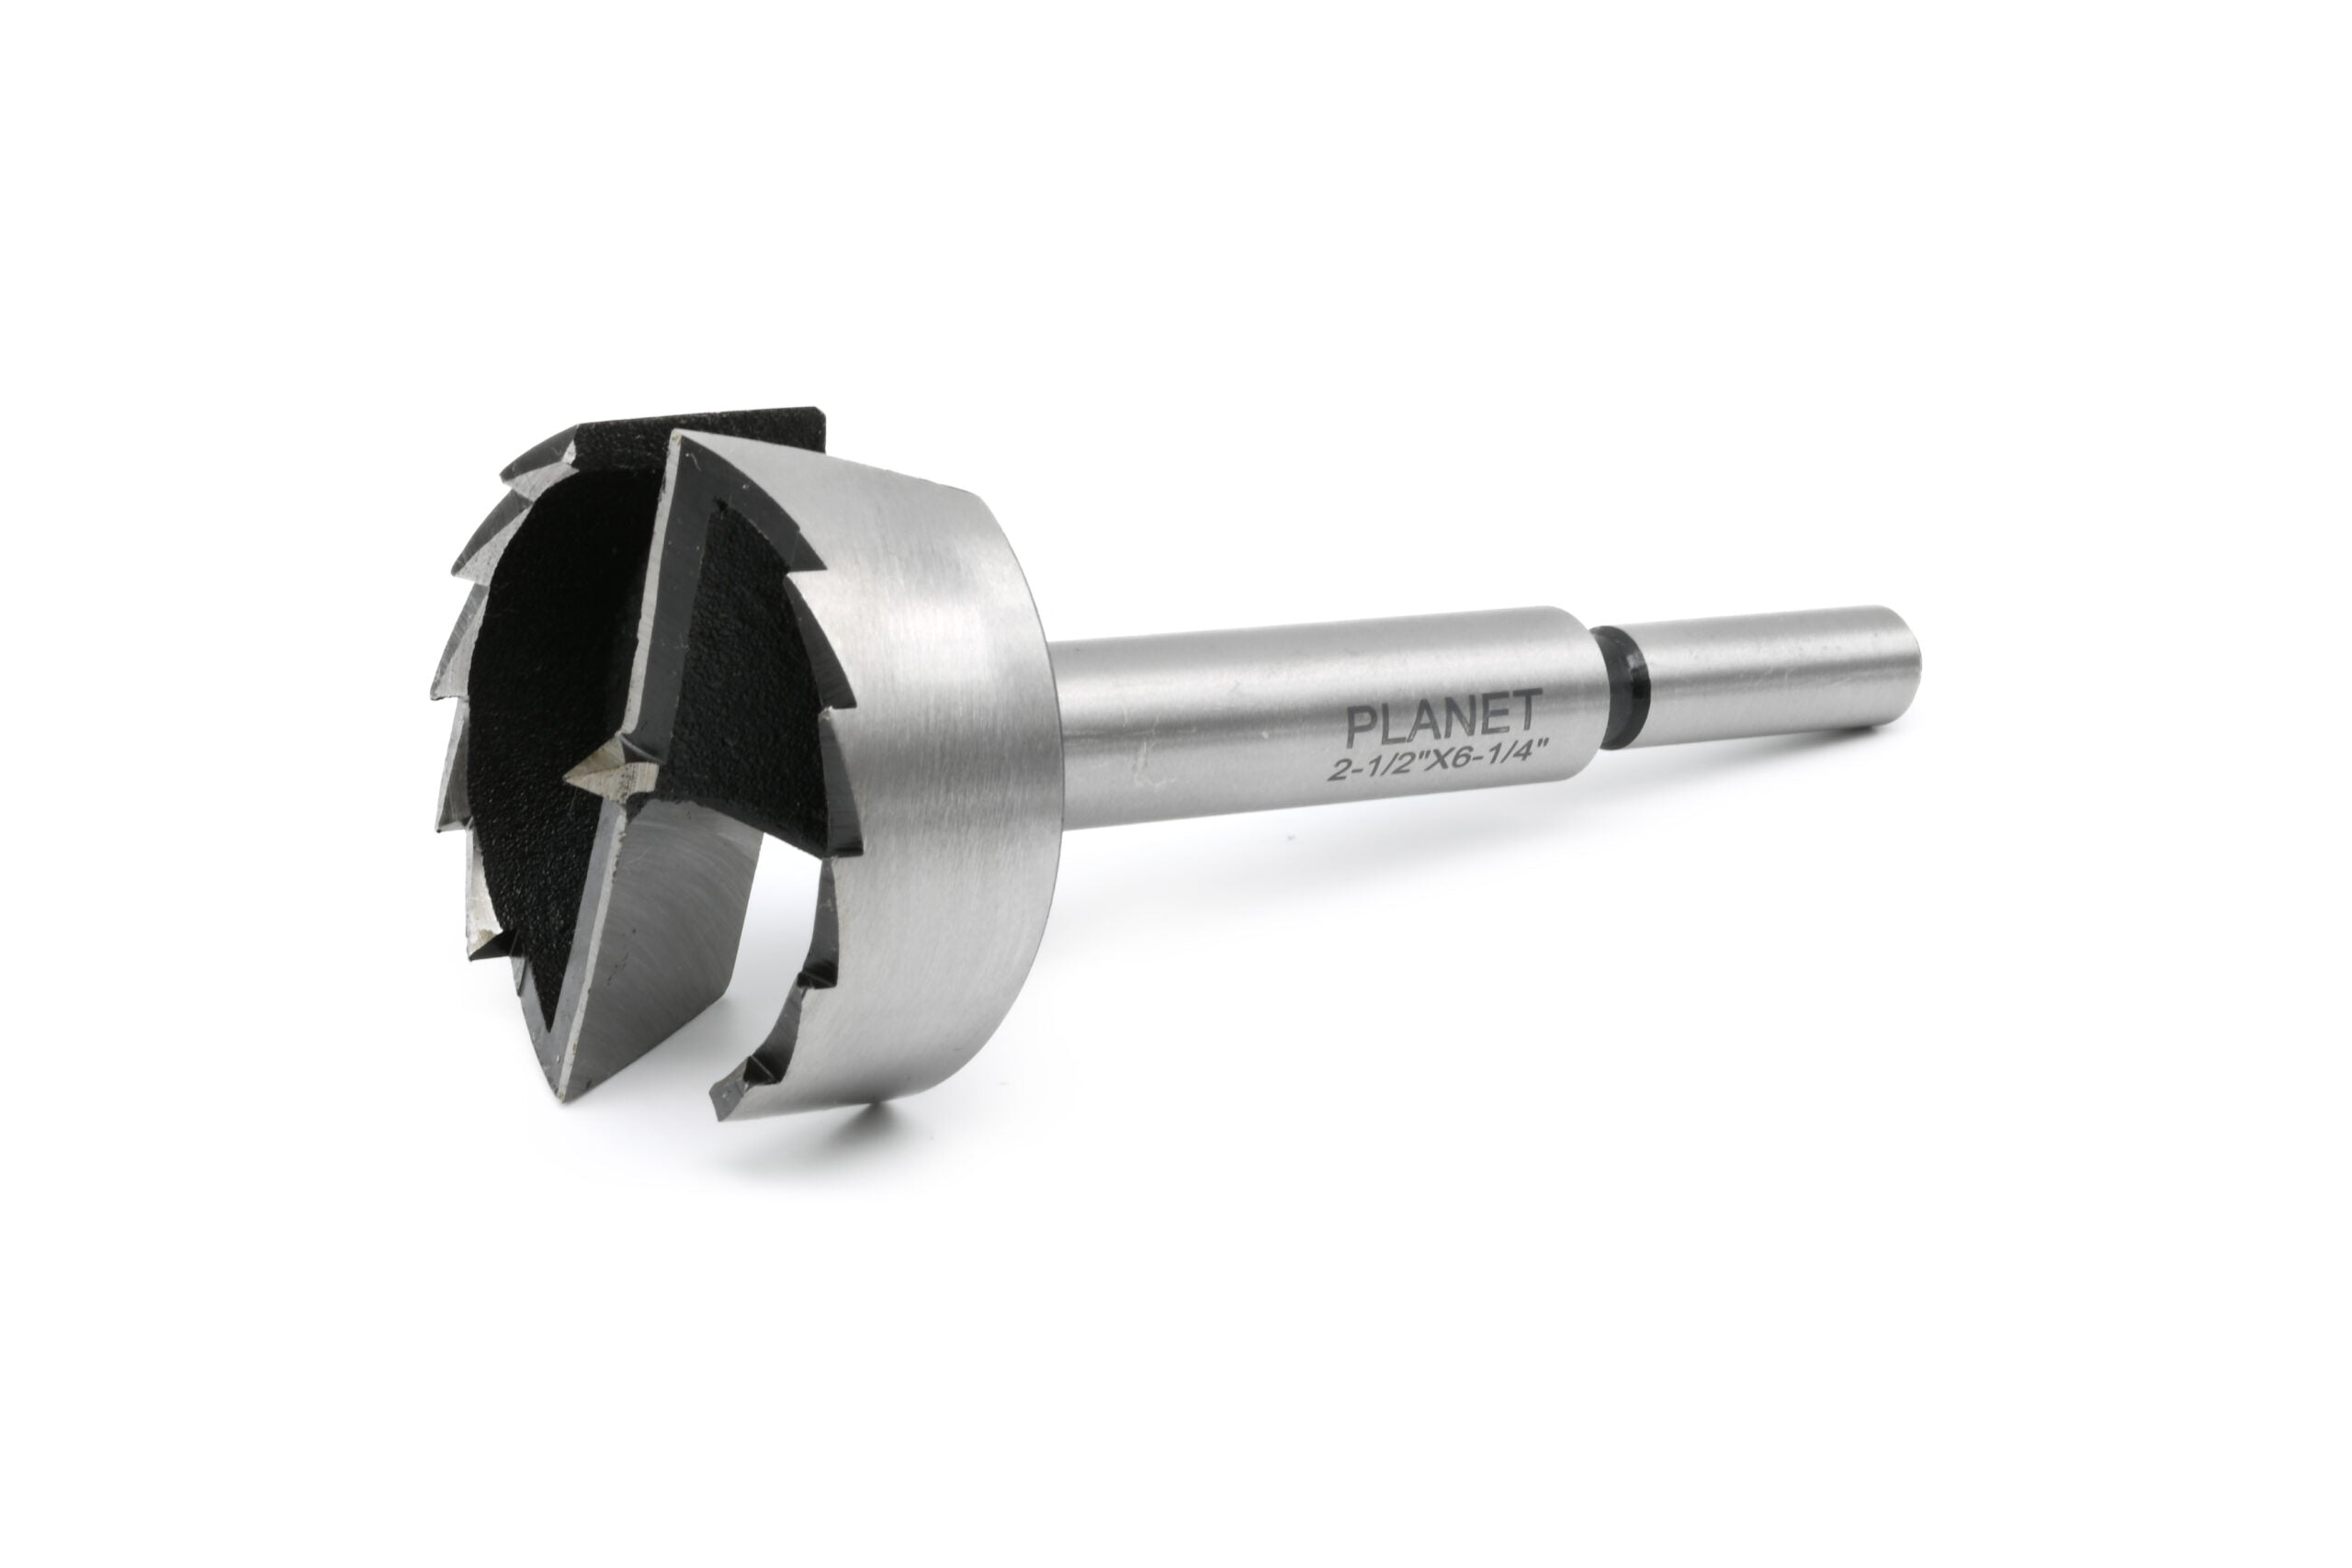 Planet Long Series Saw Tooth Forstner Bit 1-5/8" 41.28mm